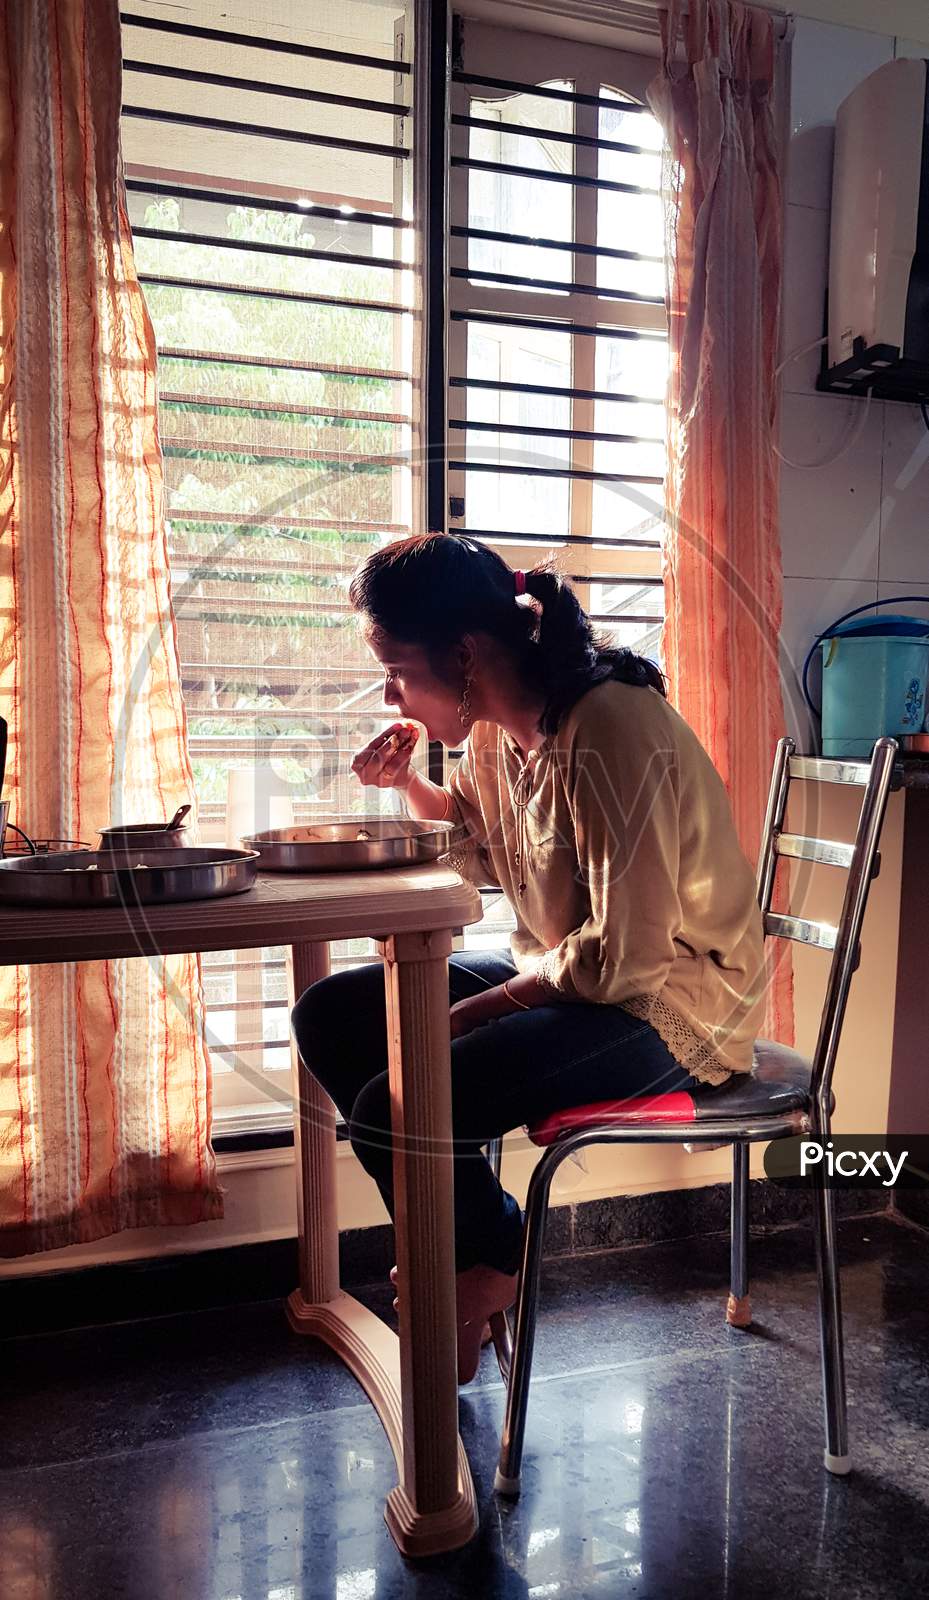 Bengaluru, Karnataka / India - April 26 2019: A young woman sitting by the window during morning hours and eating food from a steel plate